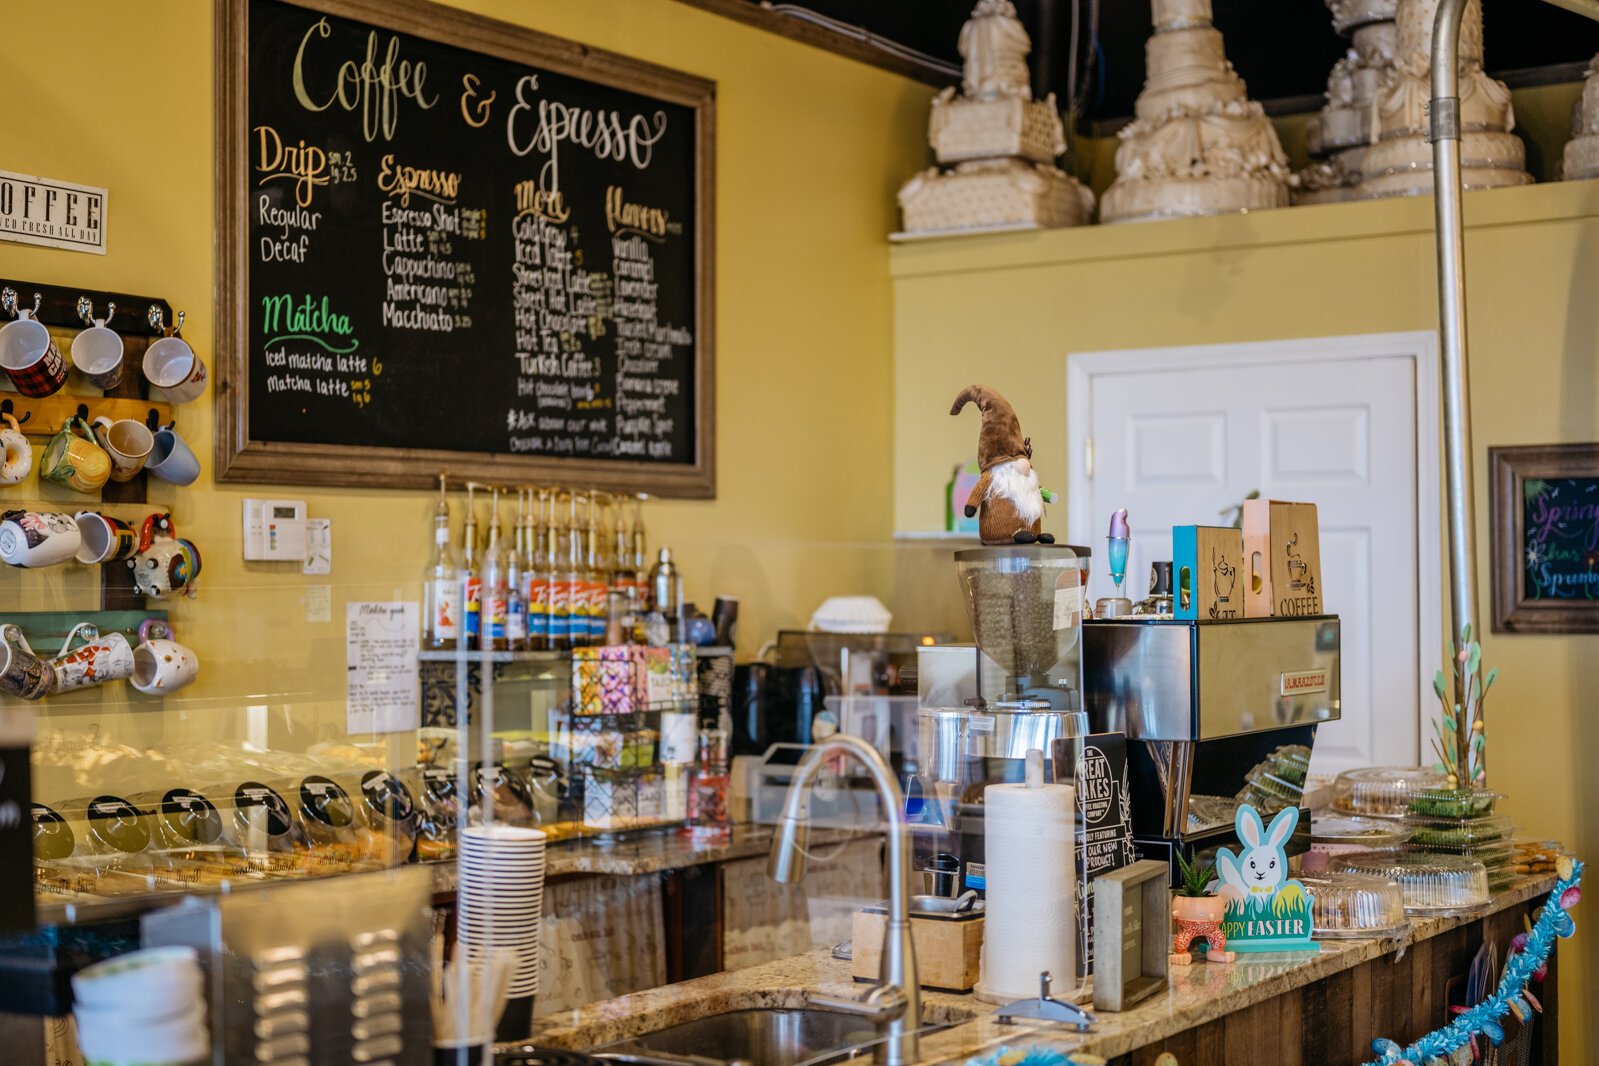 Street Sweets opened in Sterling Heights in 2017 and evolved from a cafe into a full bakery.